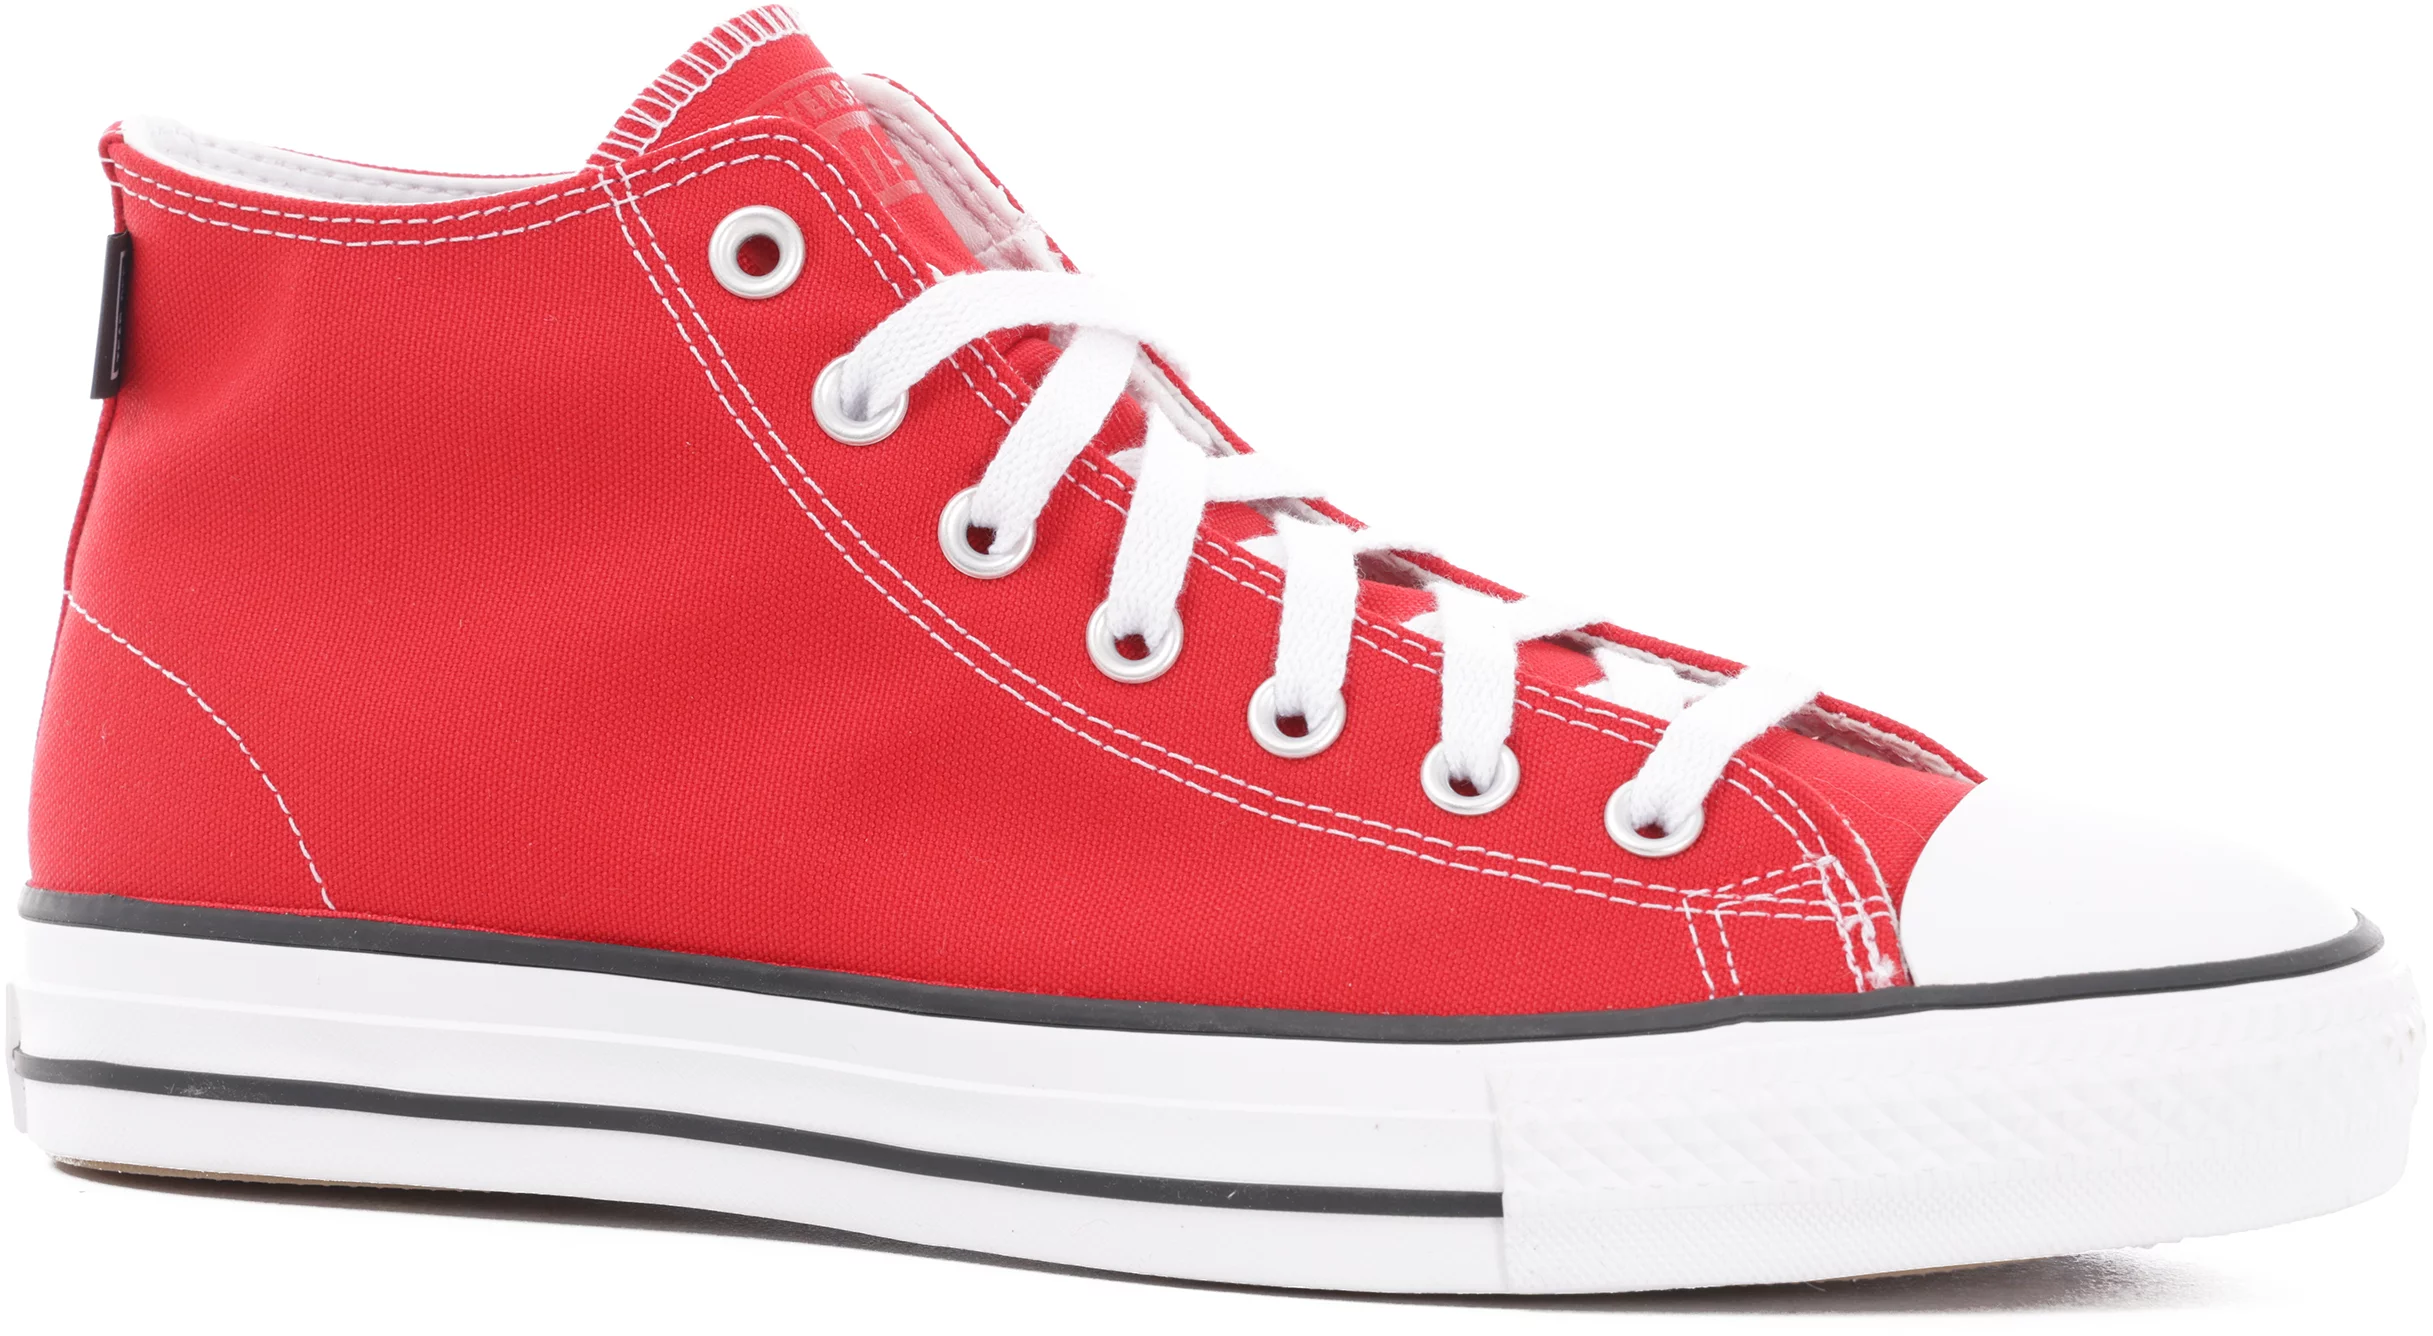 Converse Chuck Taylor All Star Pro Skate Shoes - university red/white/ black | Tactics